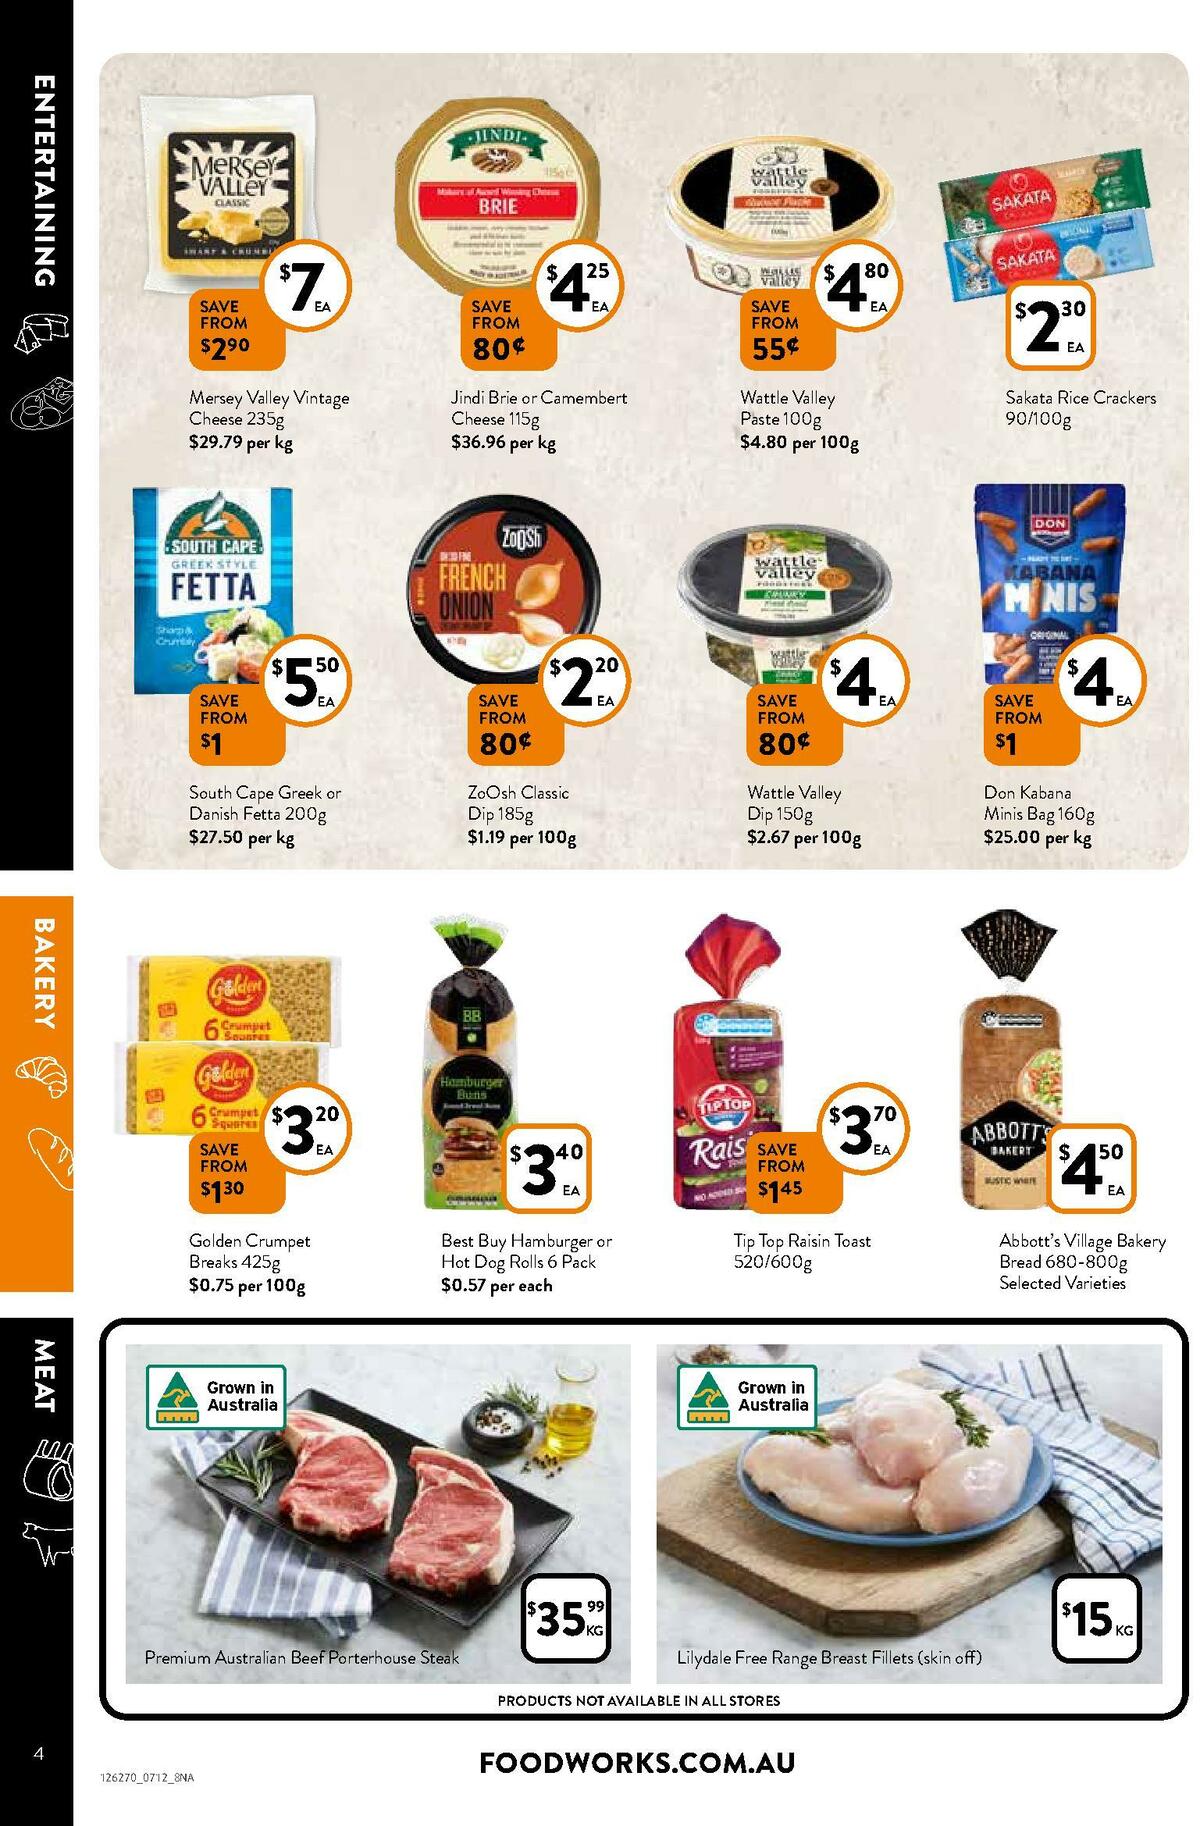 FoodWorks Catalogues from 7 December